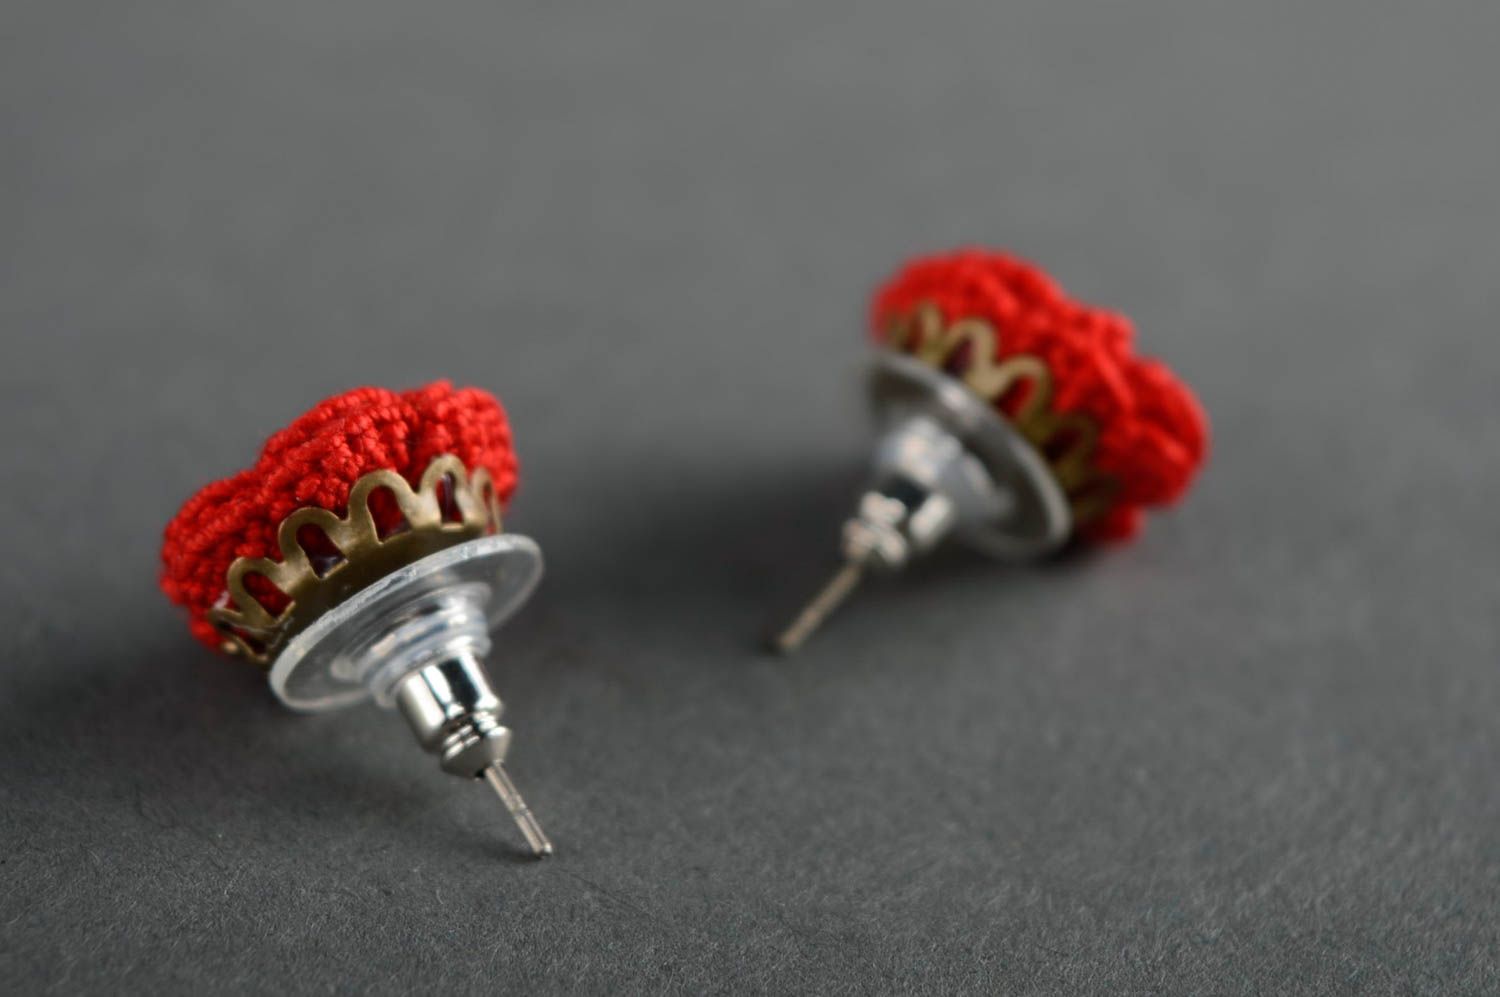 Stud earrings crocheted of cotton threads photo 2